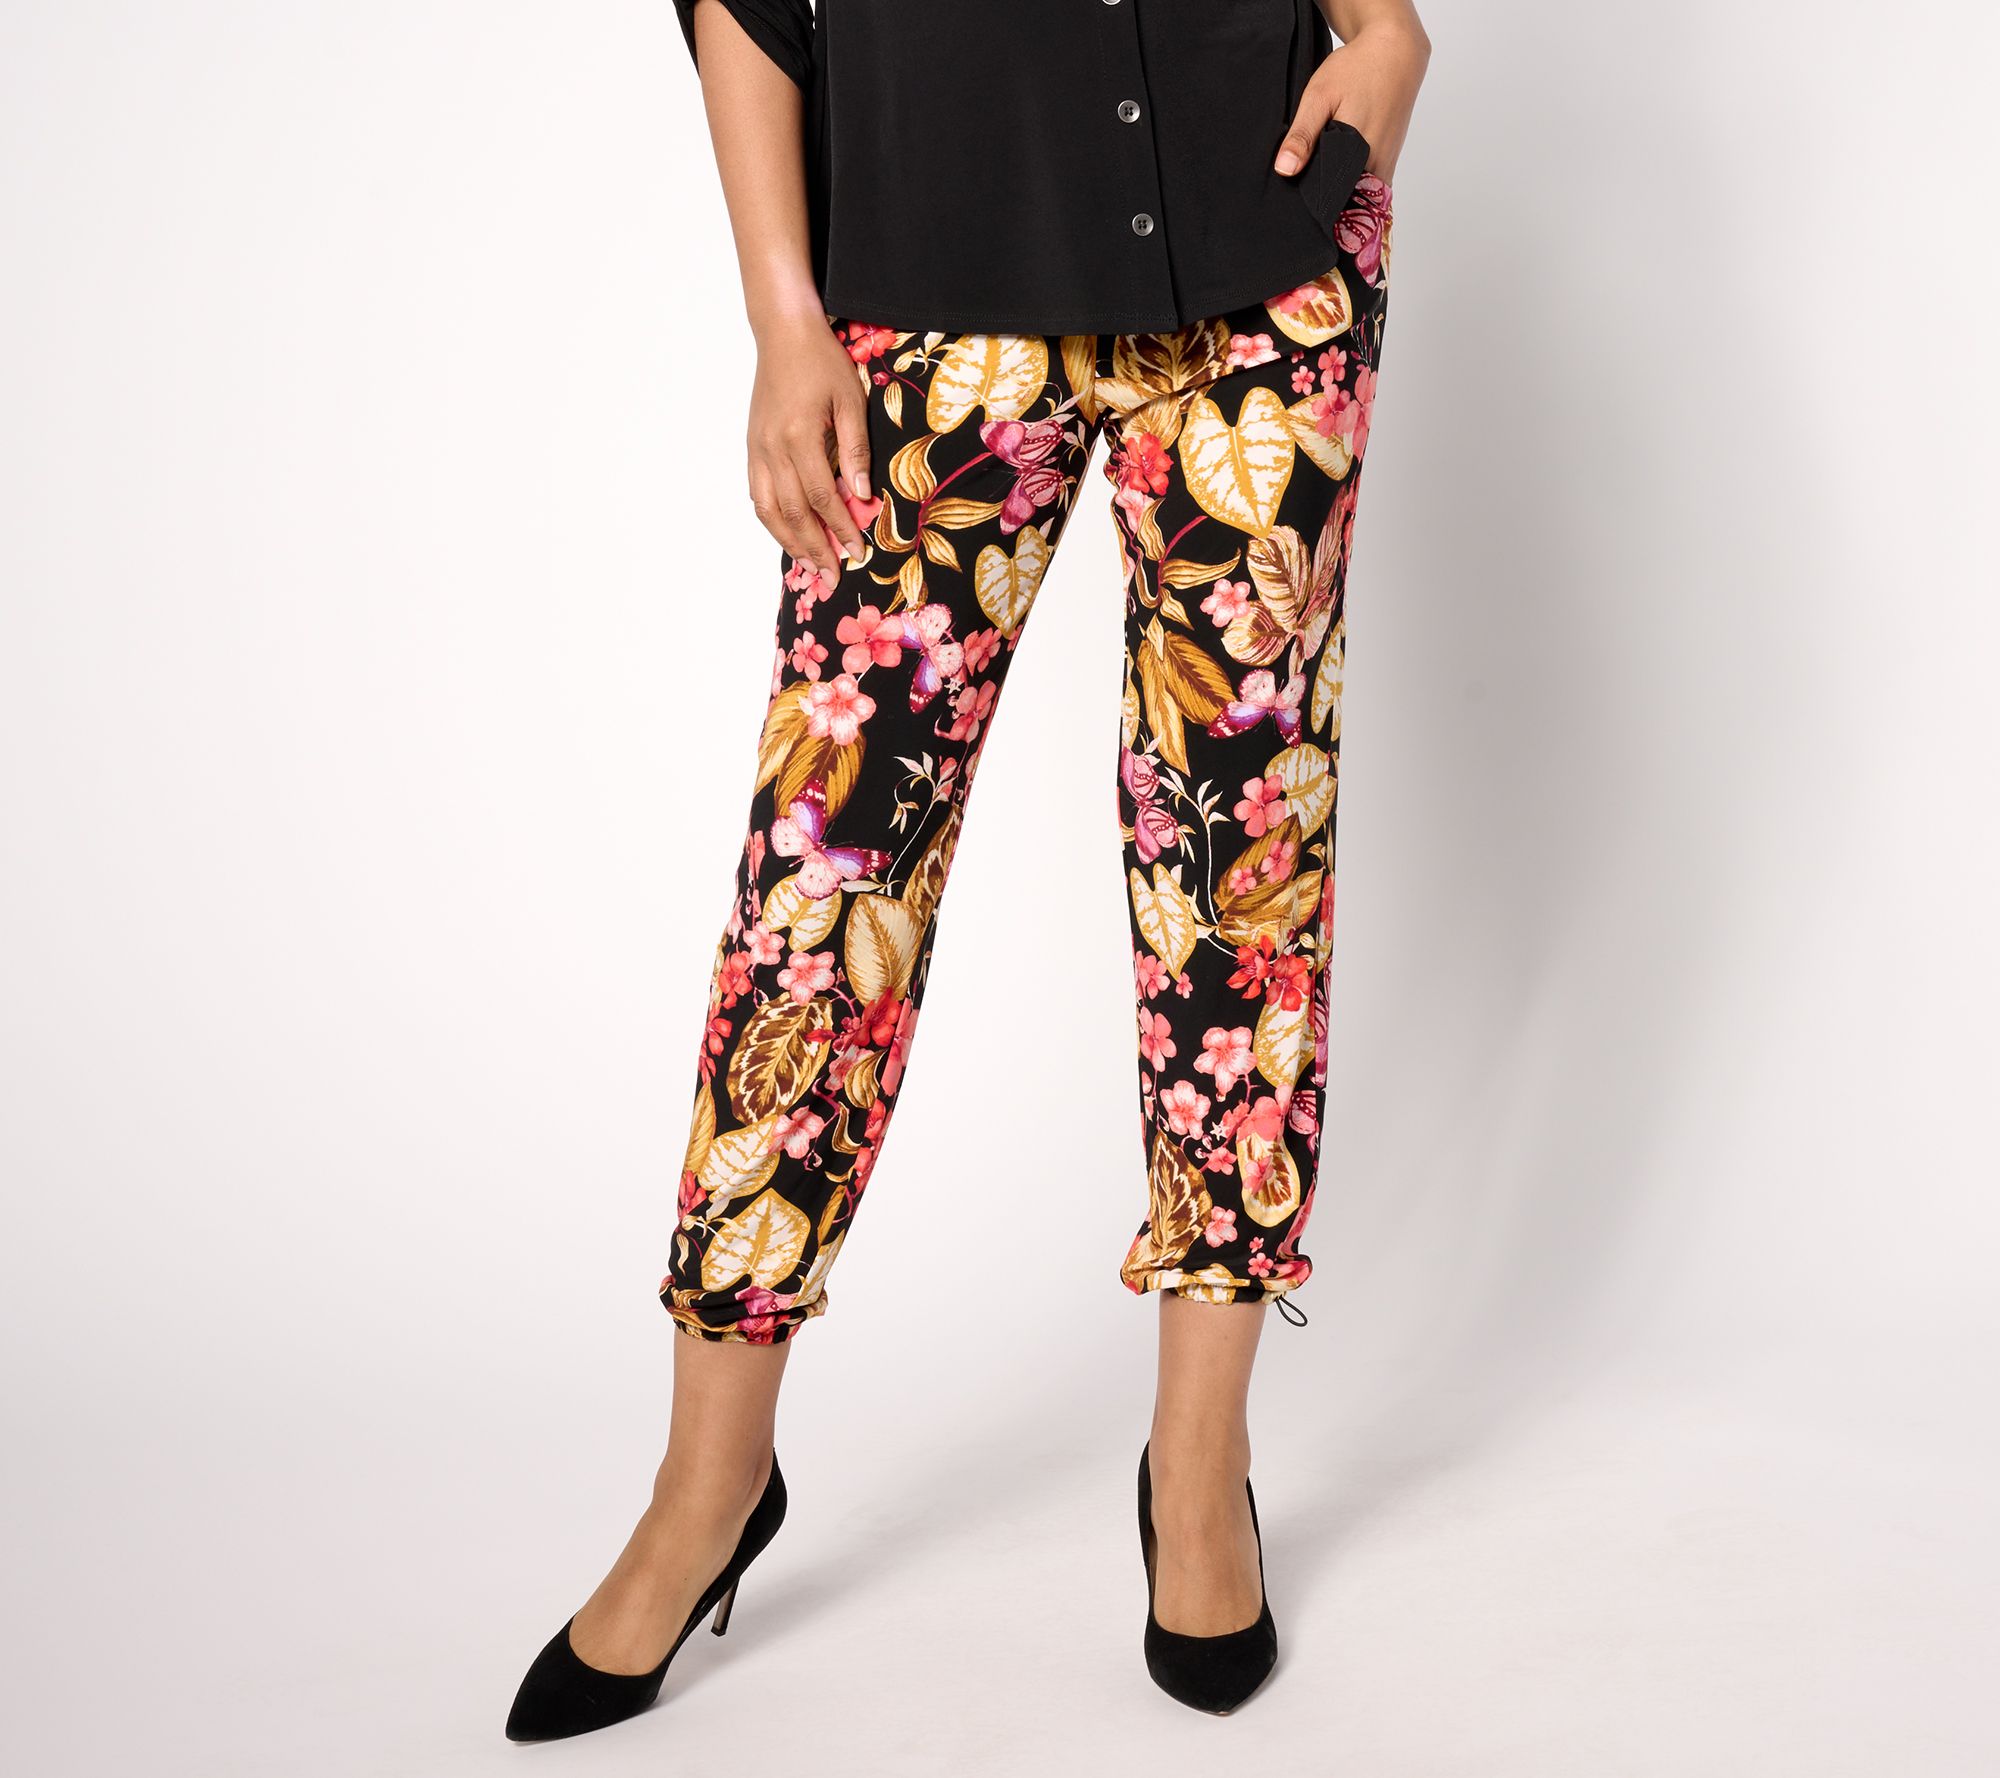 Women with Control Petite Cotton Jersey Pants with Zipper Detail